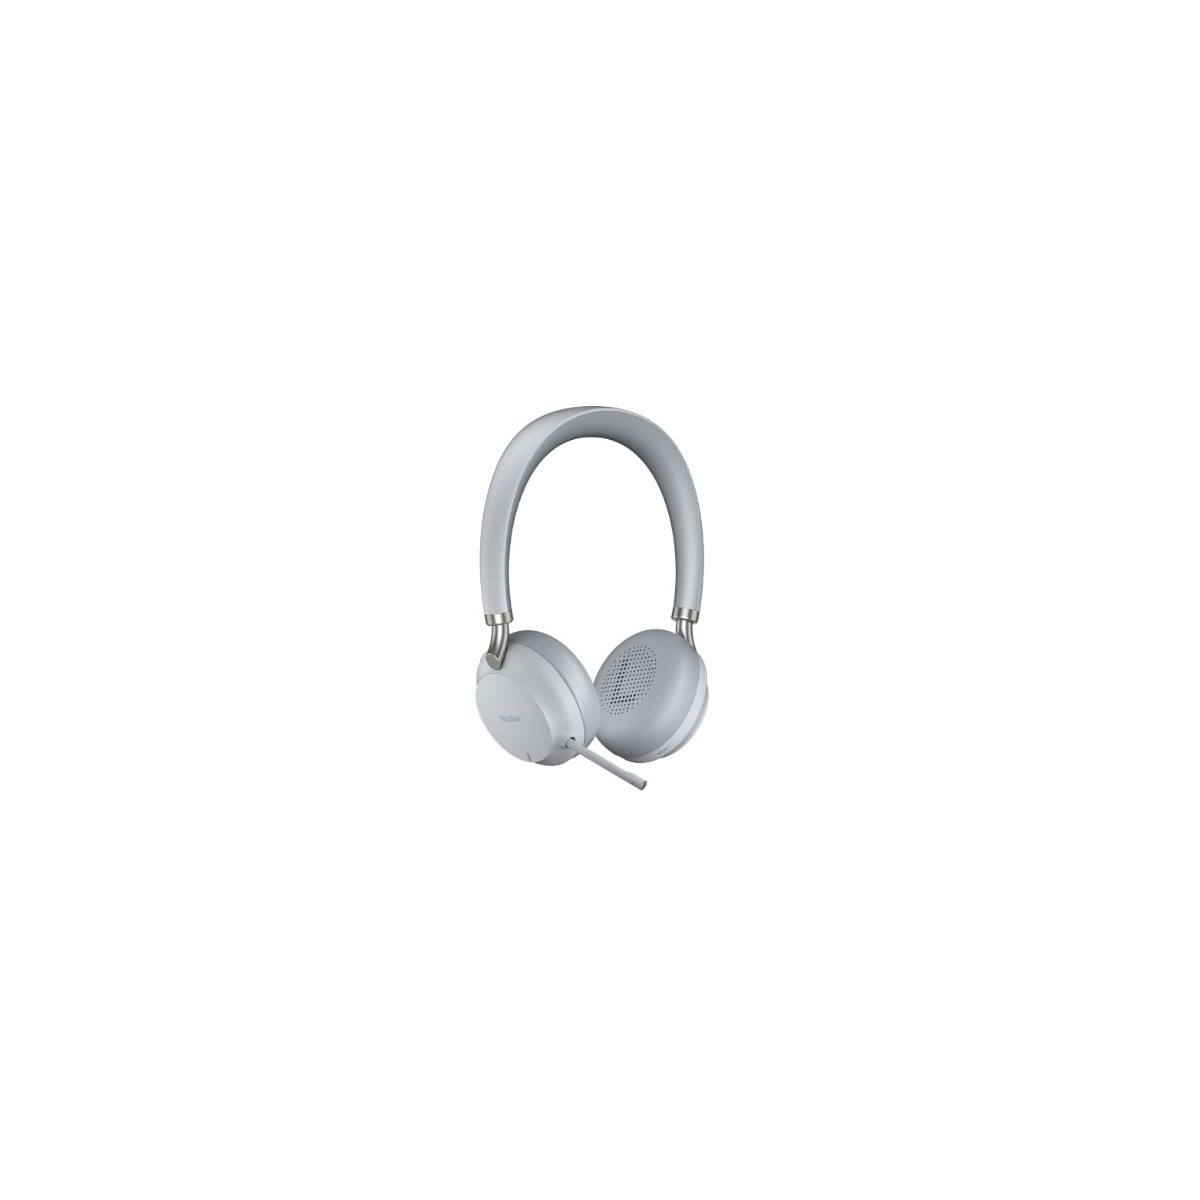 Yealink Bluetooth Headset - BH72 with Charging Stand UC Light Gray - Headset - Bluetooth